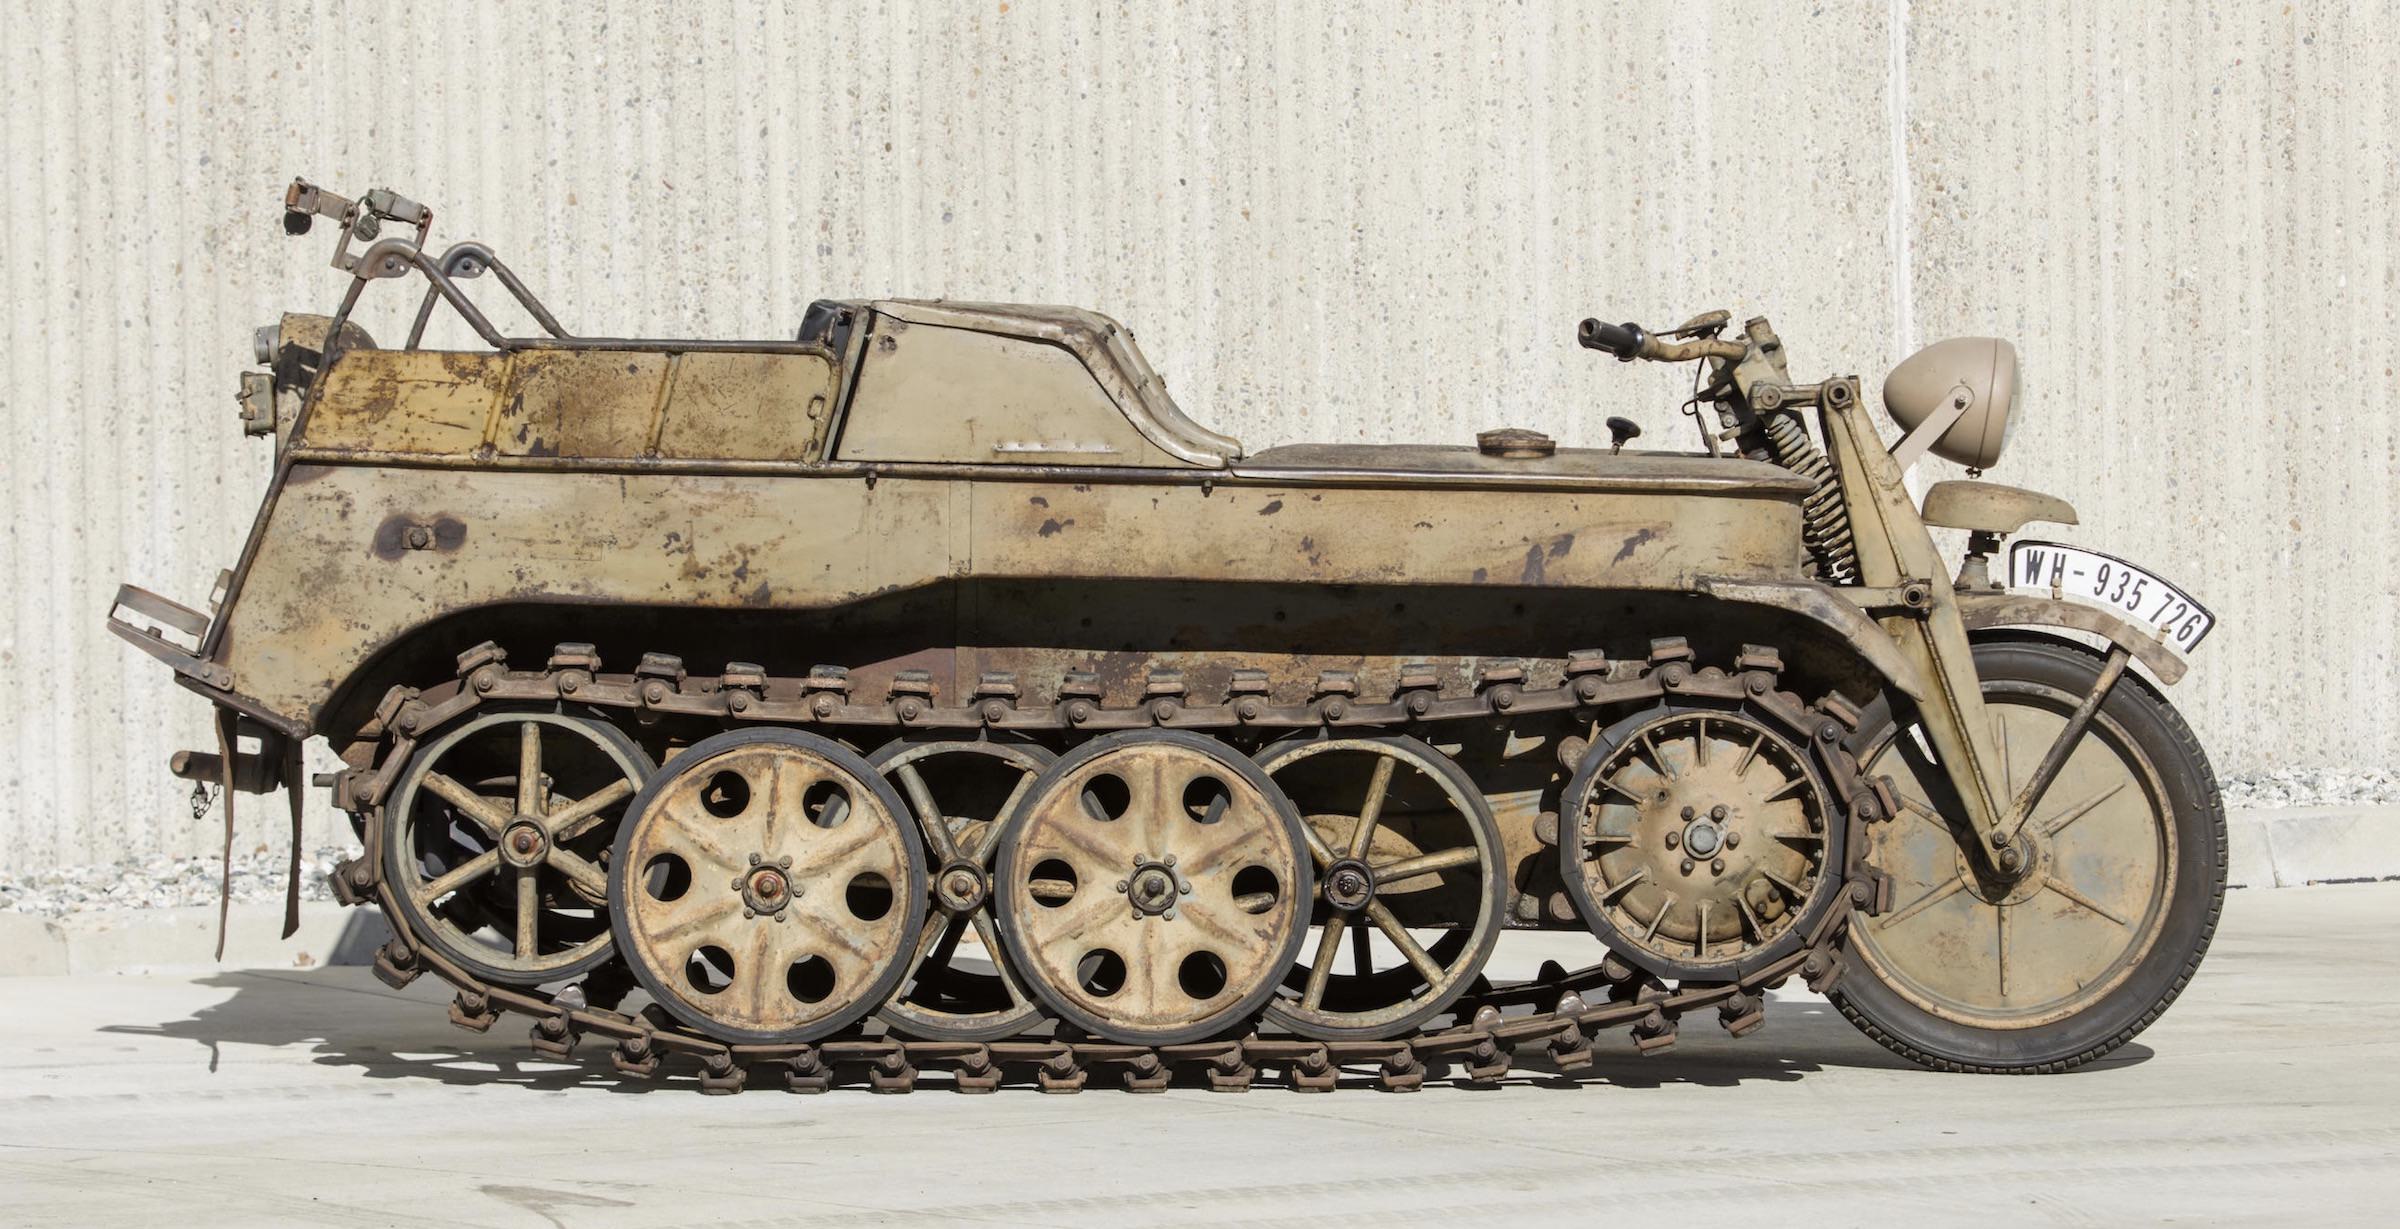 The Kettenkrad - NSU Sd. Kfz. 2 - Half Motorcycle, Half Tank, And Capable  Of 50 MPH